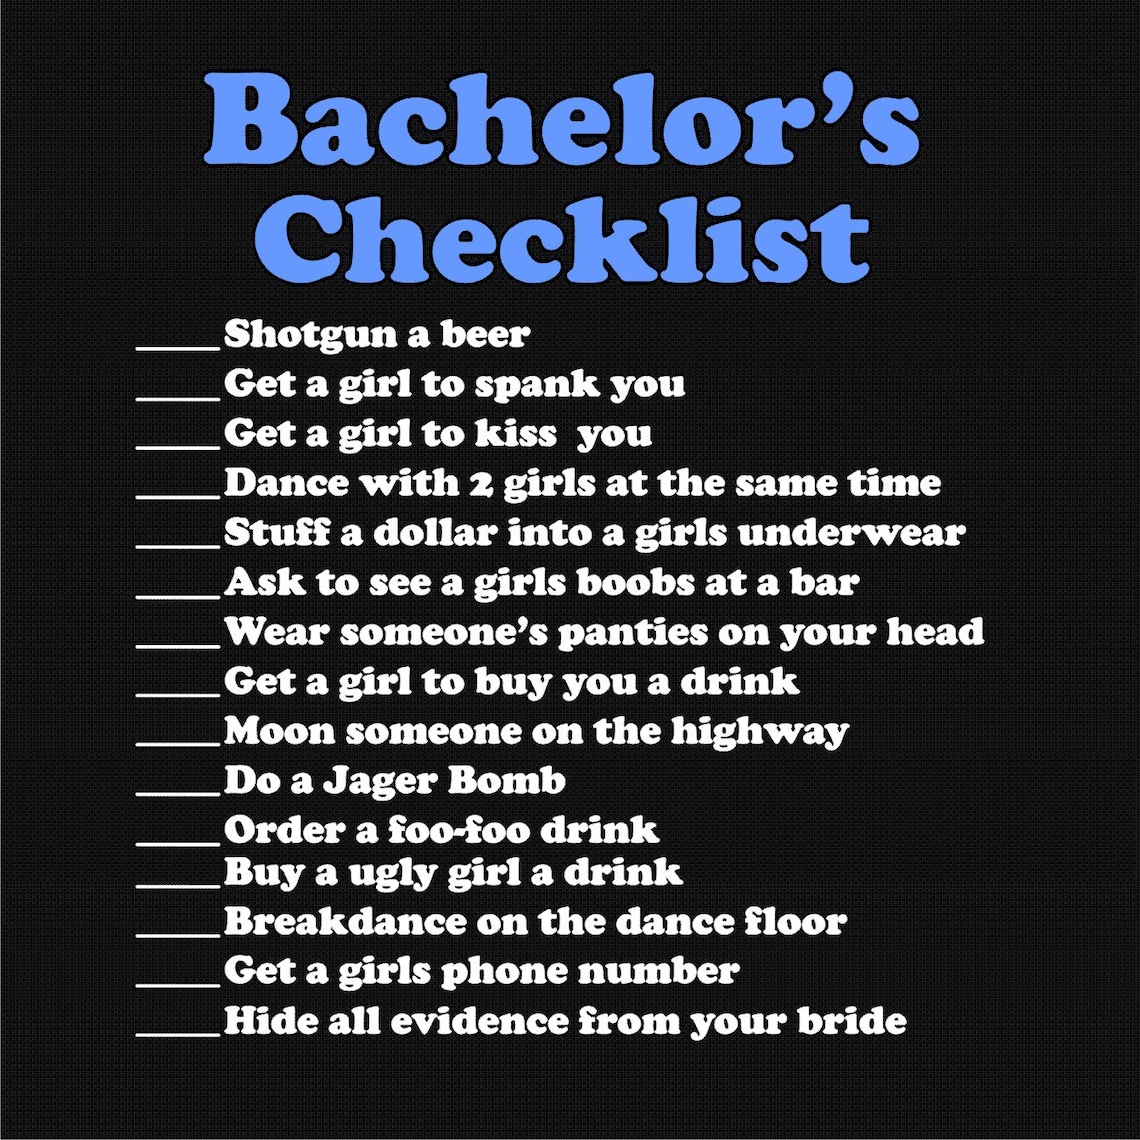 Bachelor's Checklist T-Shirt Parties Wedding Groom Party | Etsy